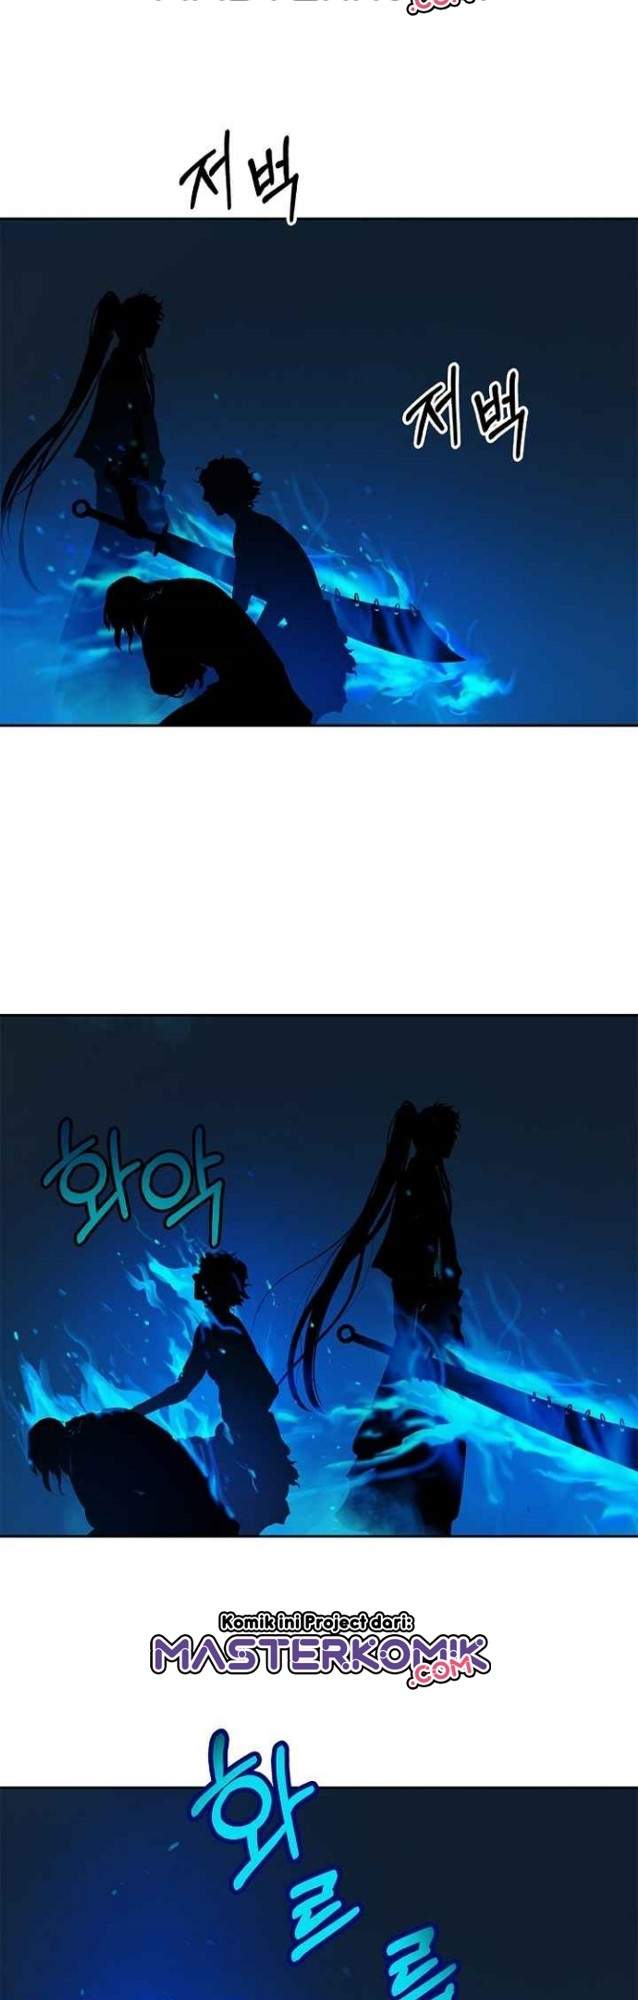 Cystic Story Chapter 18